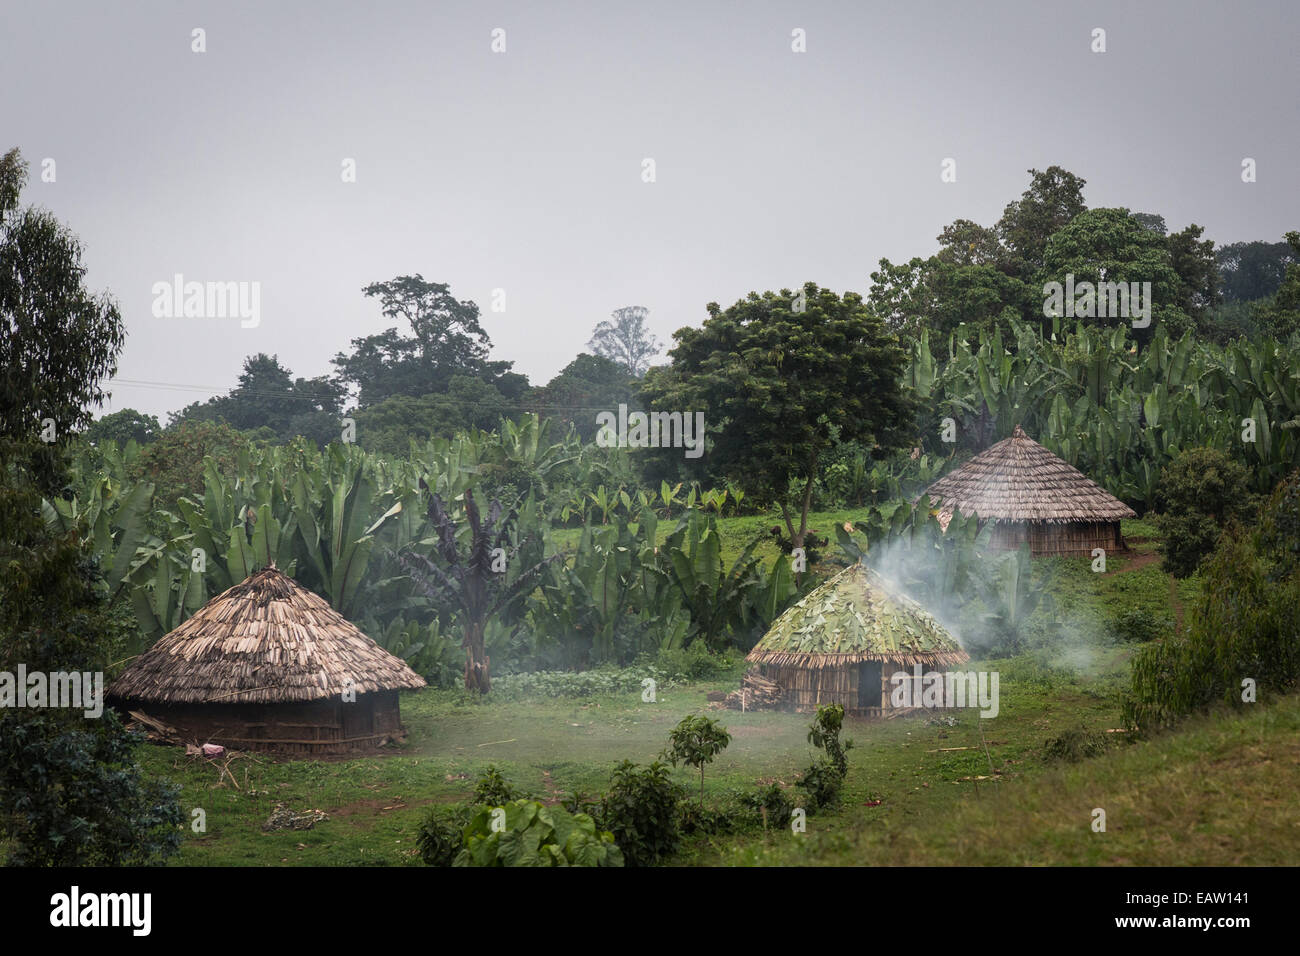 Ethiopian highlands mountain scenery with tribal huts Stock Photo